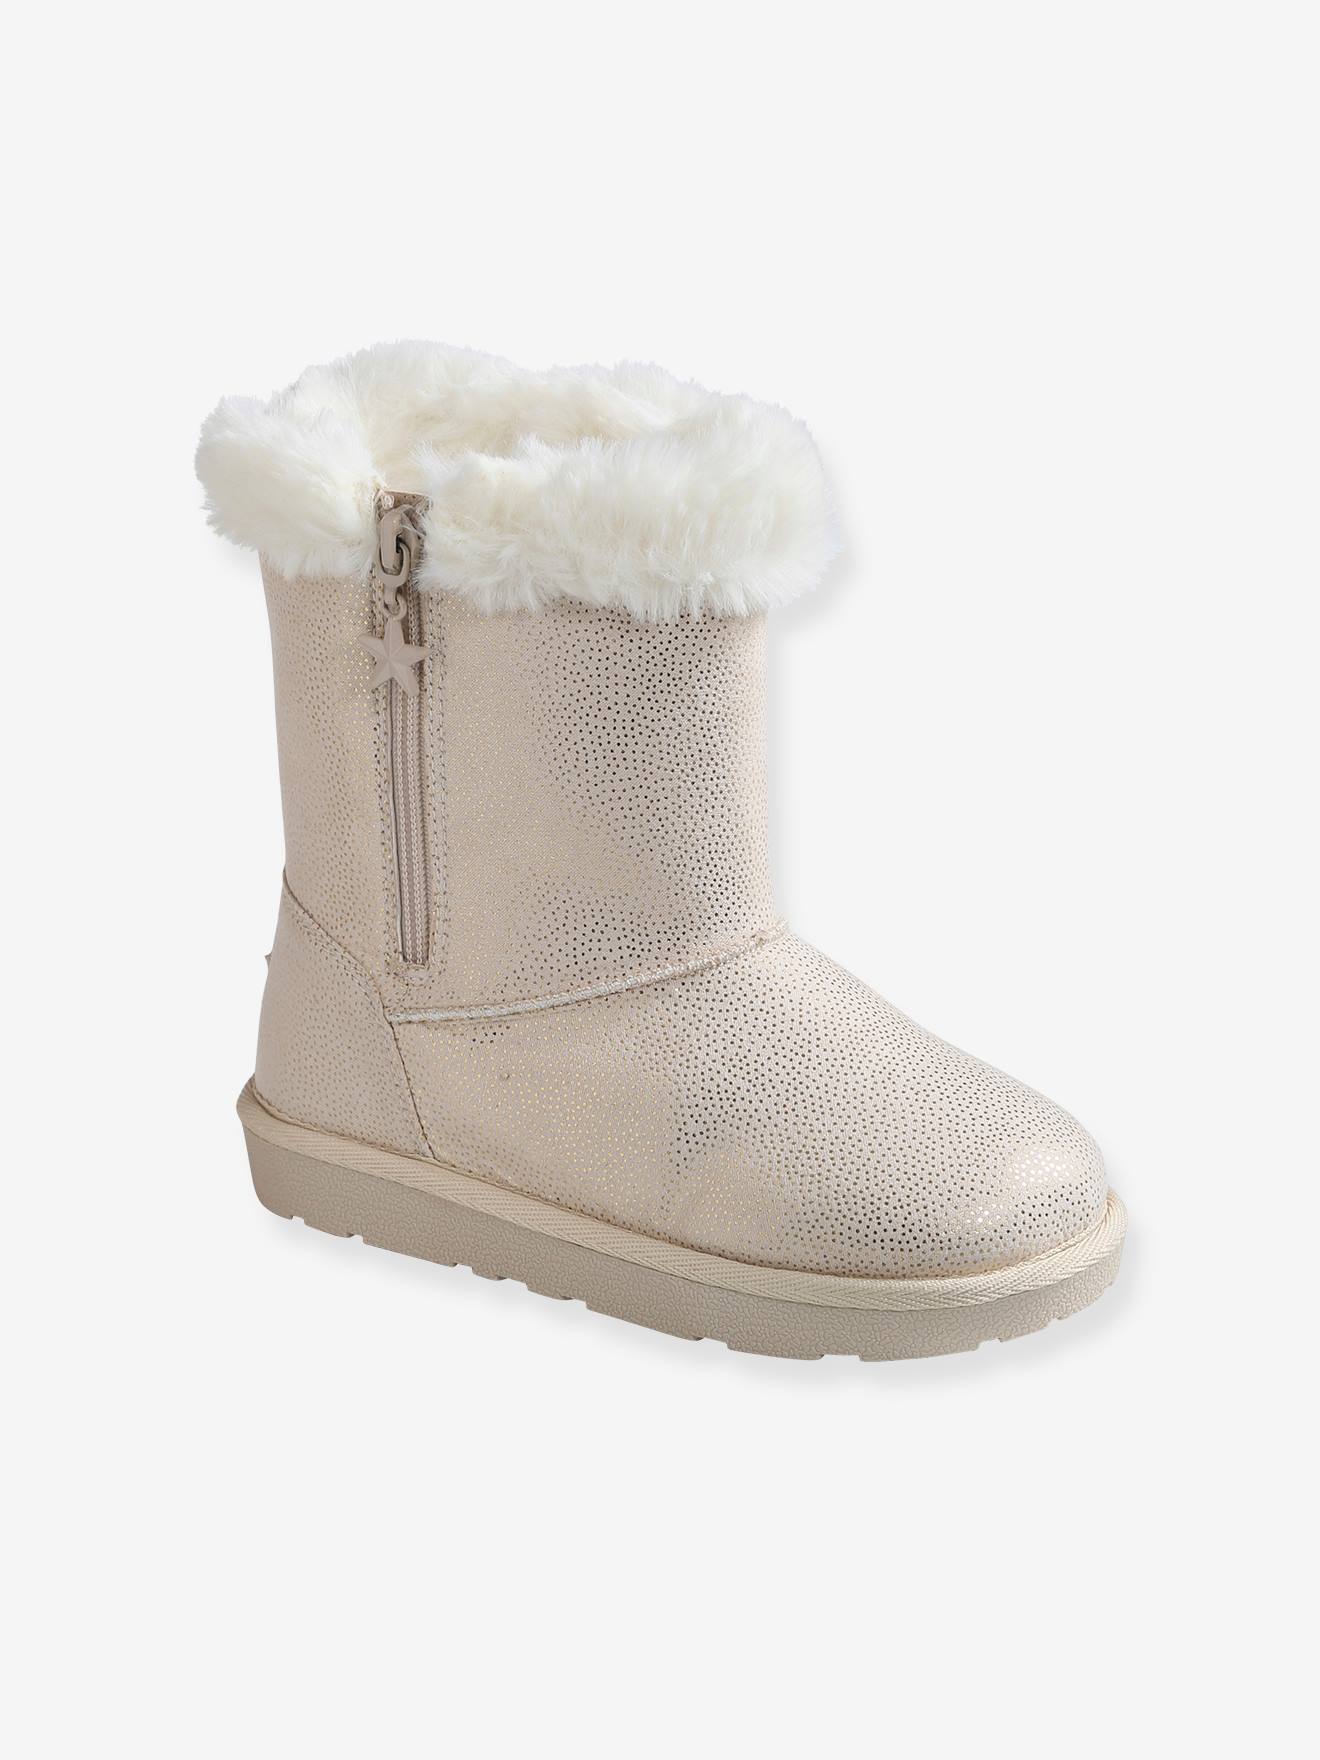 Girls' Boots with Fur - beige light metalised, Shoes